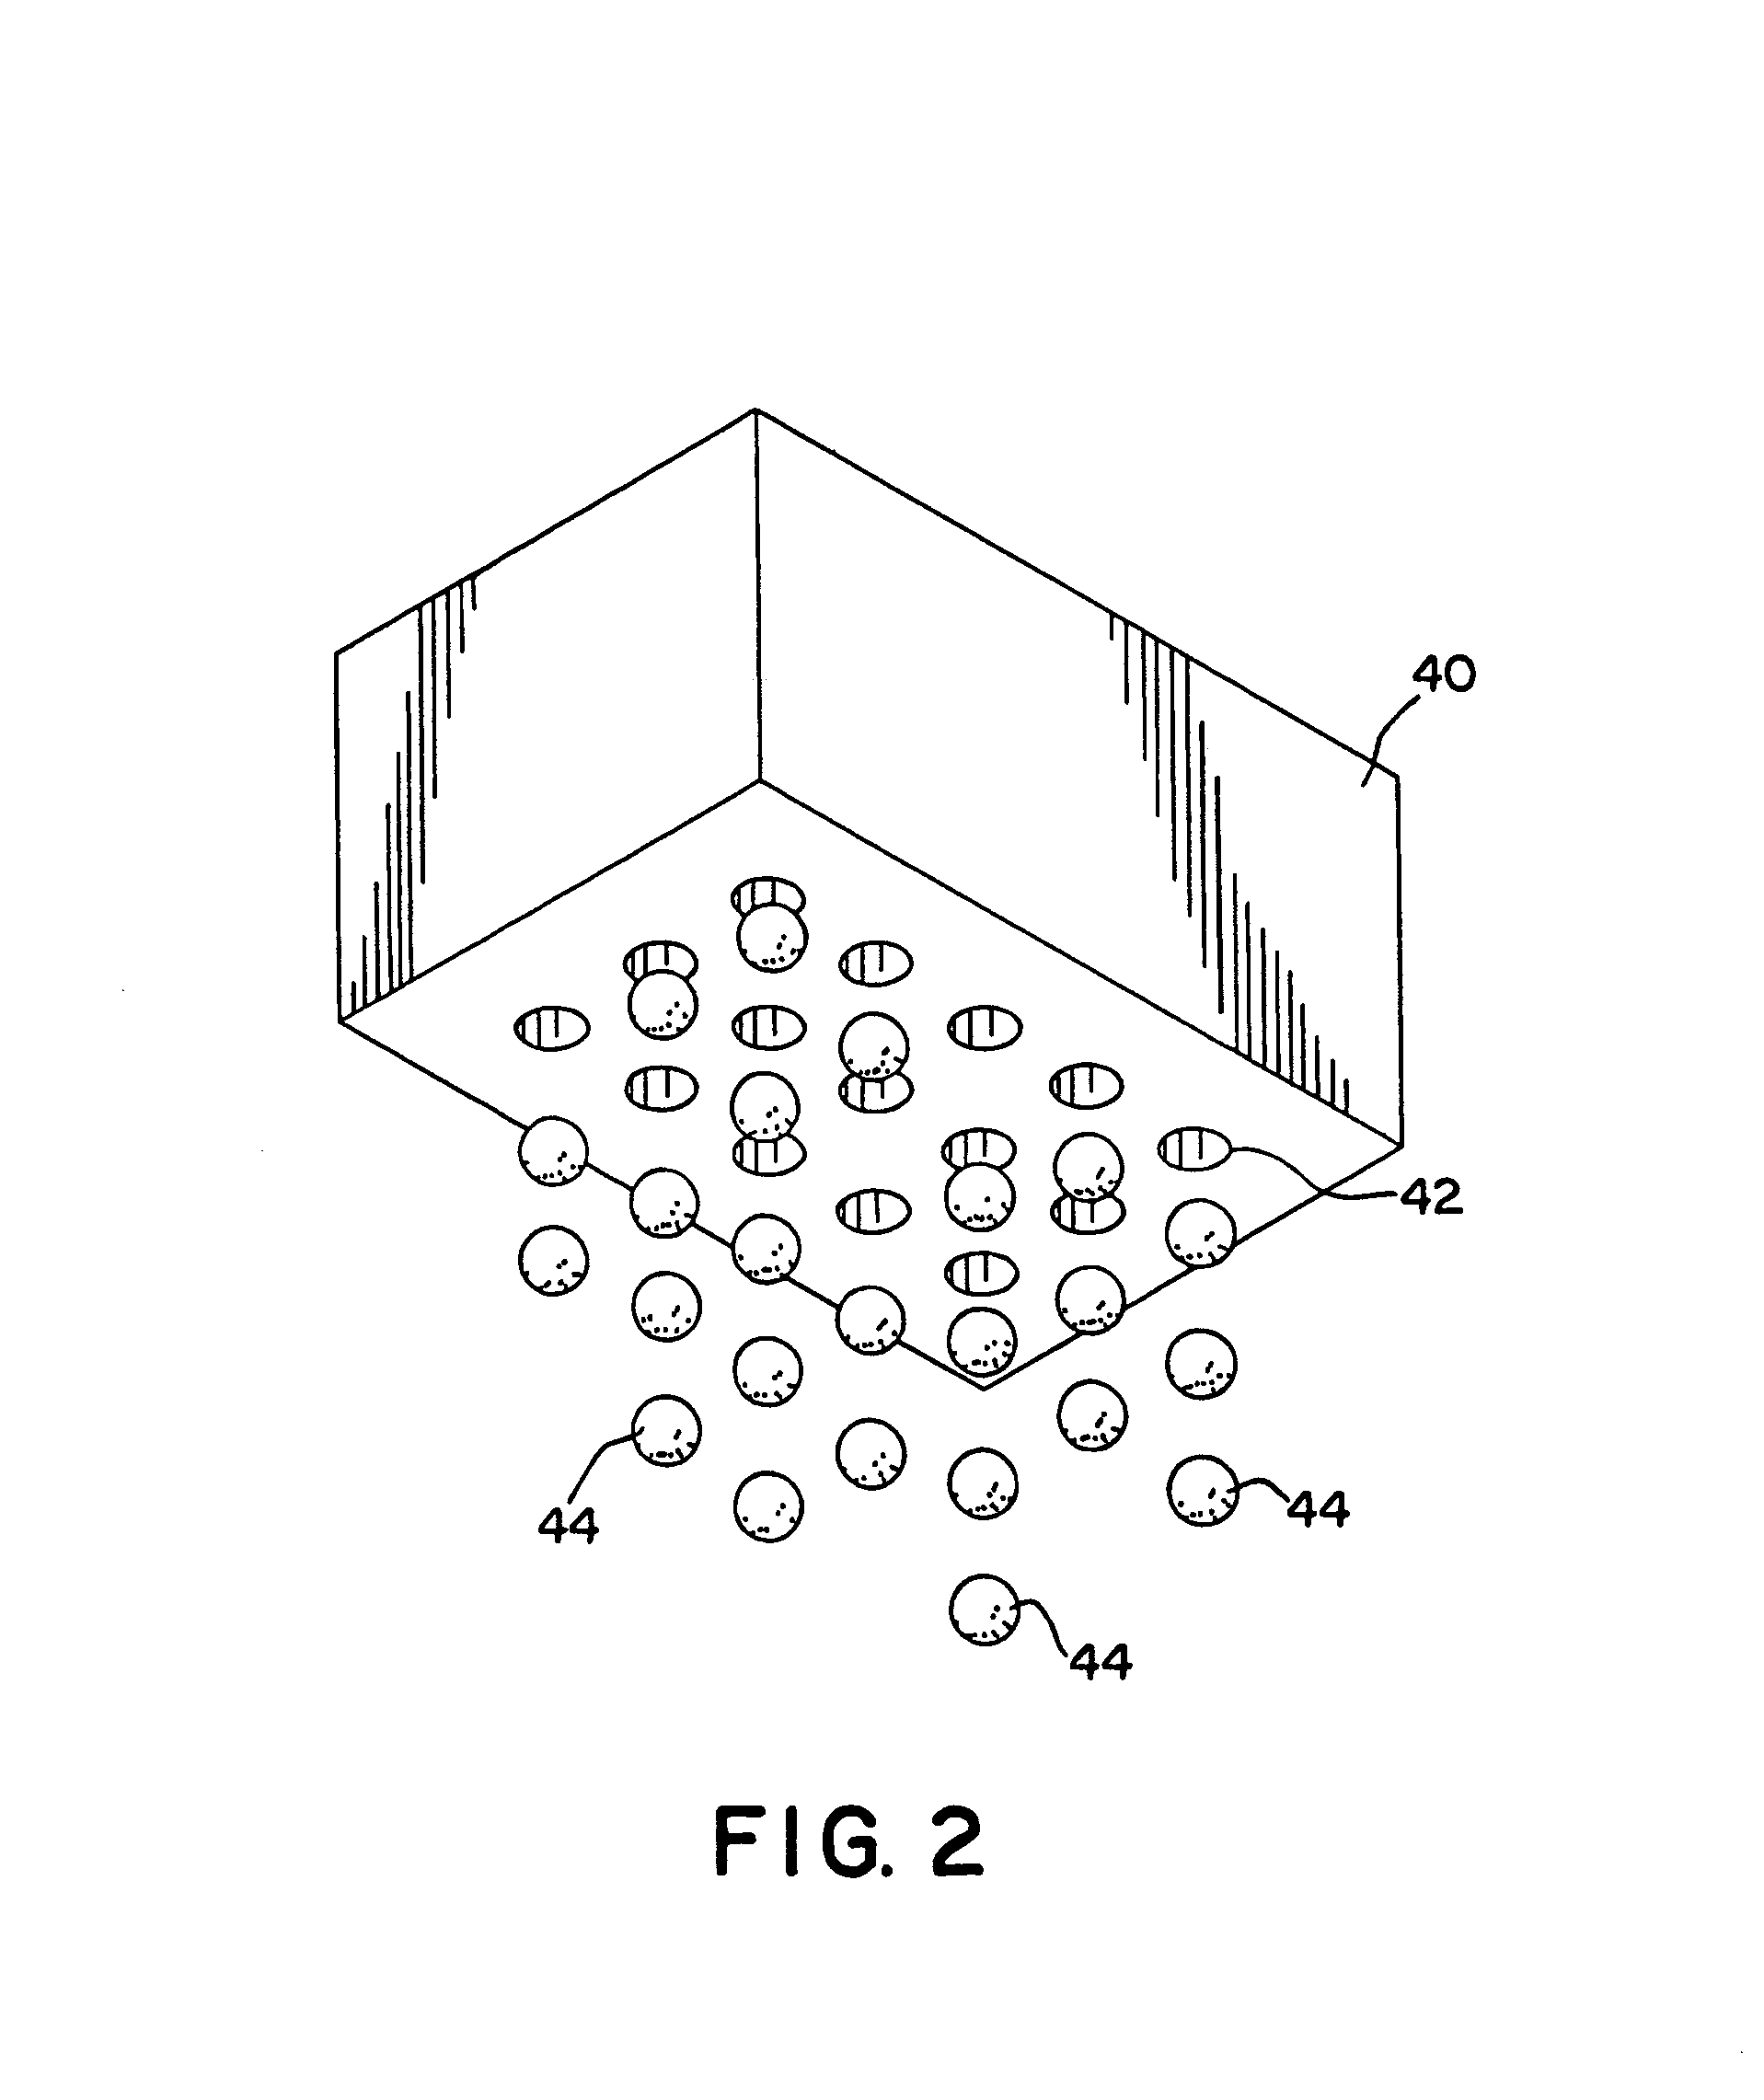 Non-impact printing method for applying compositions to webs and products produced therefrom